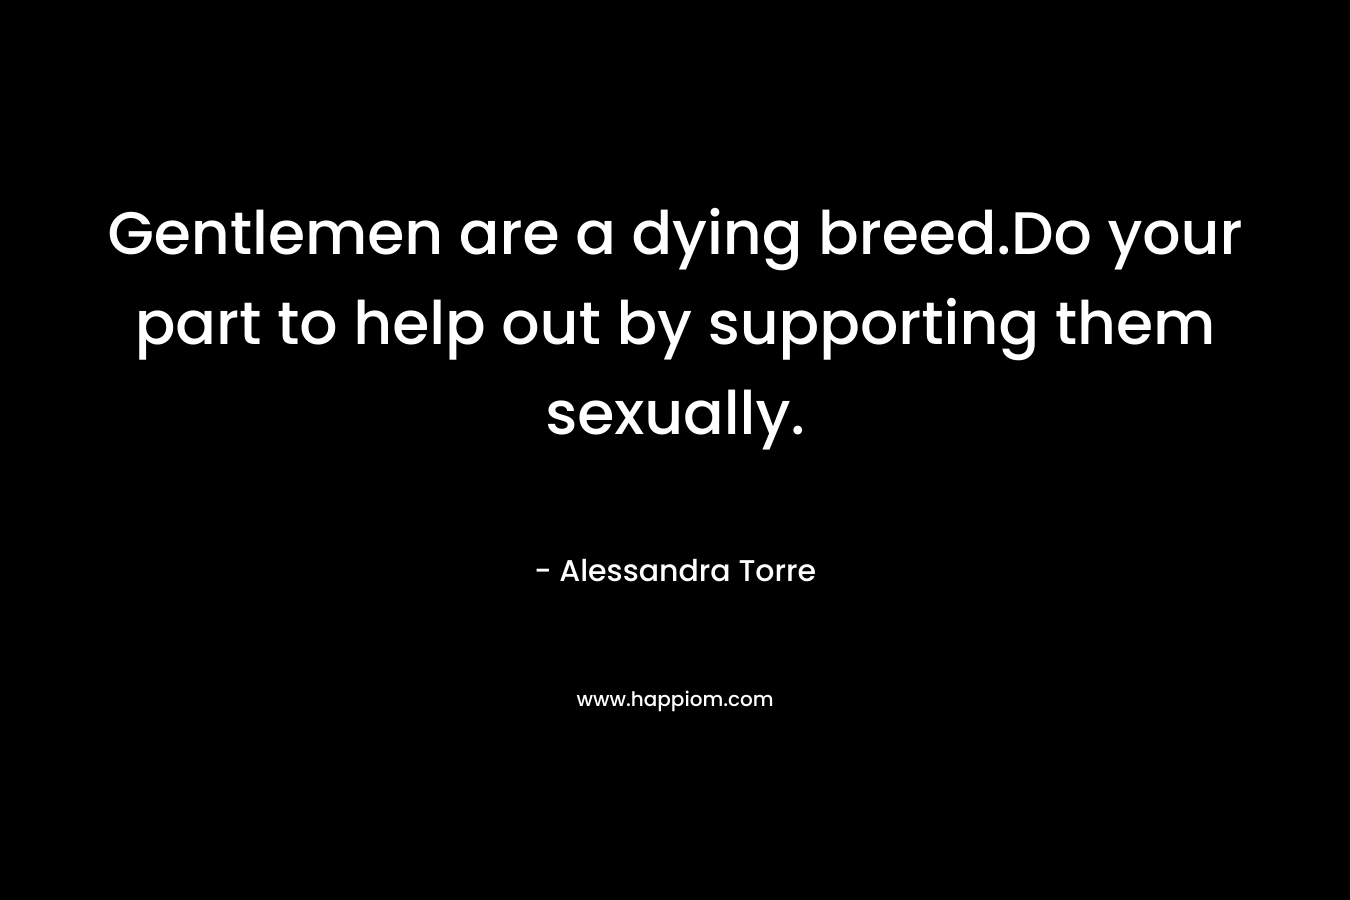 Gentlemen are a dying breed.Do your part to help out by supporting them sexually.